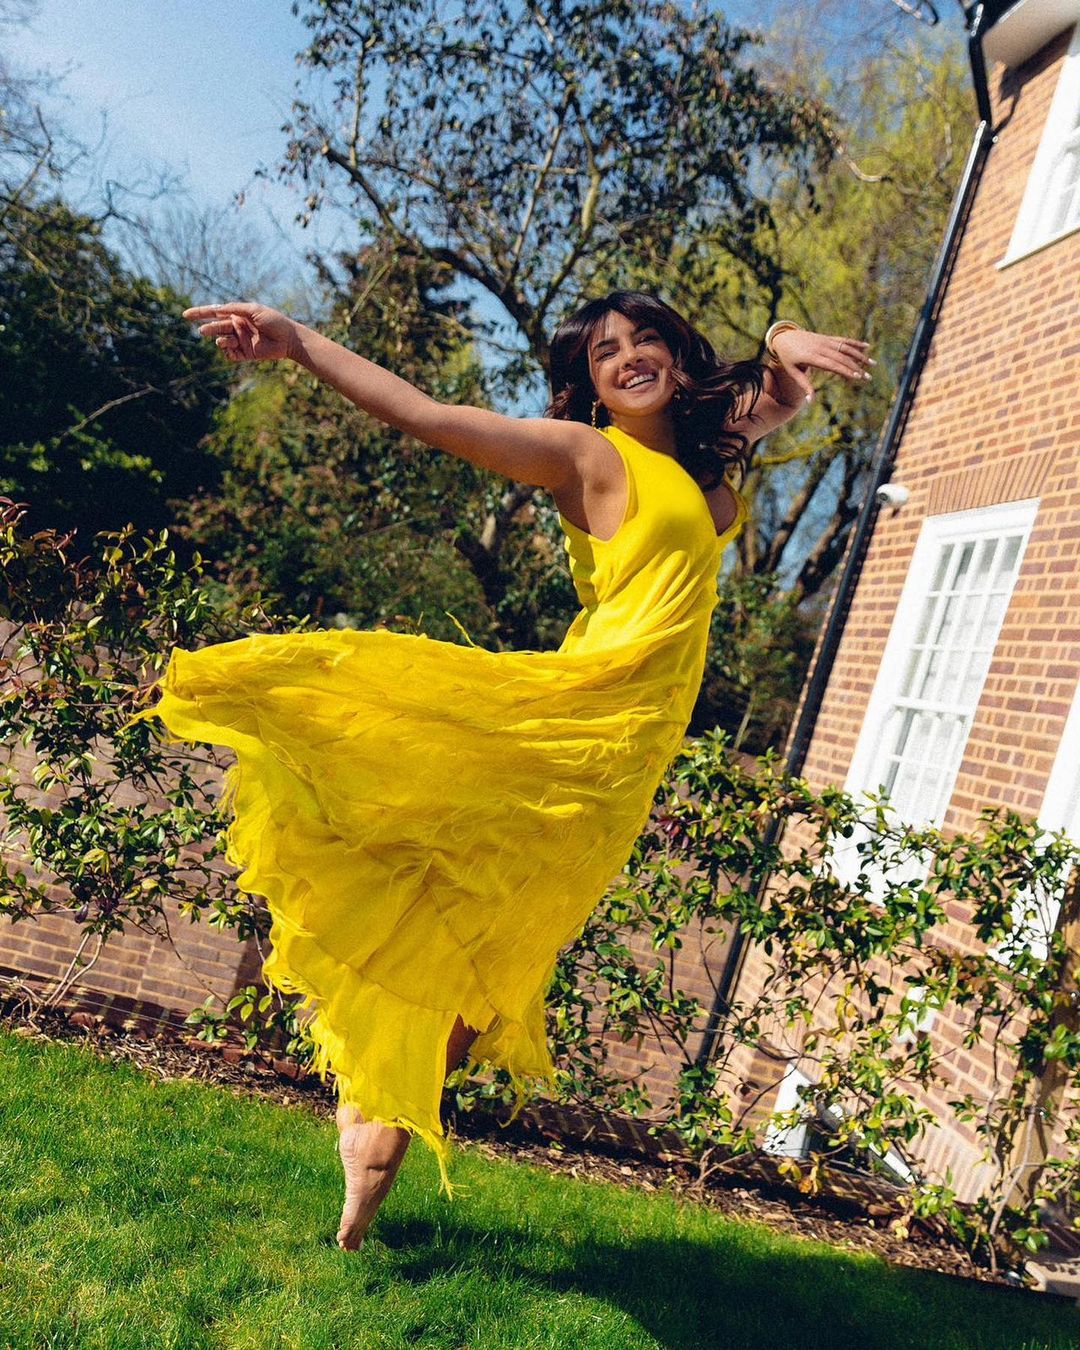  Priyanka Chopra makes the most of a sunny day in the bright yellow dress. (Image: Instagram)